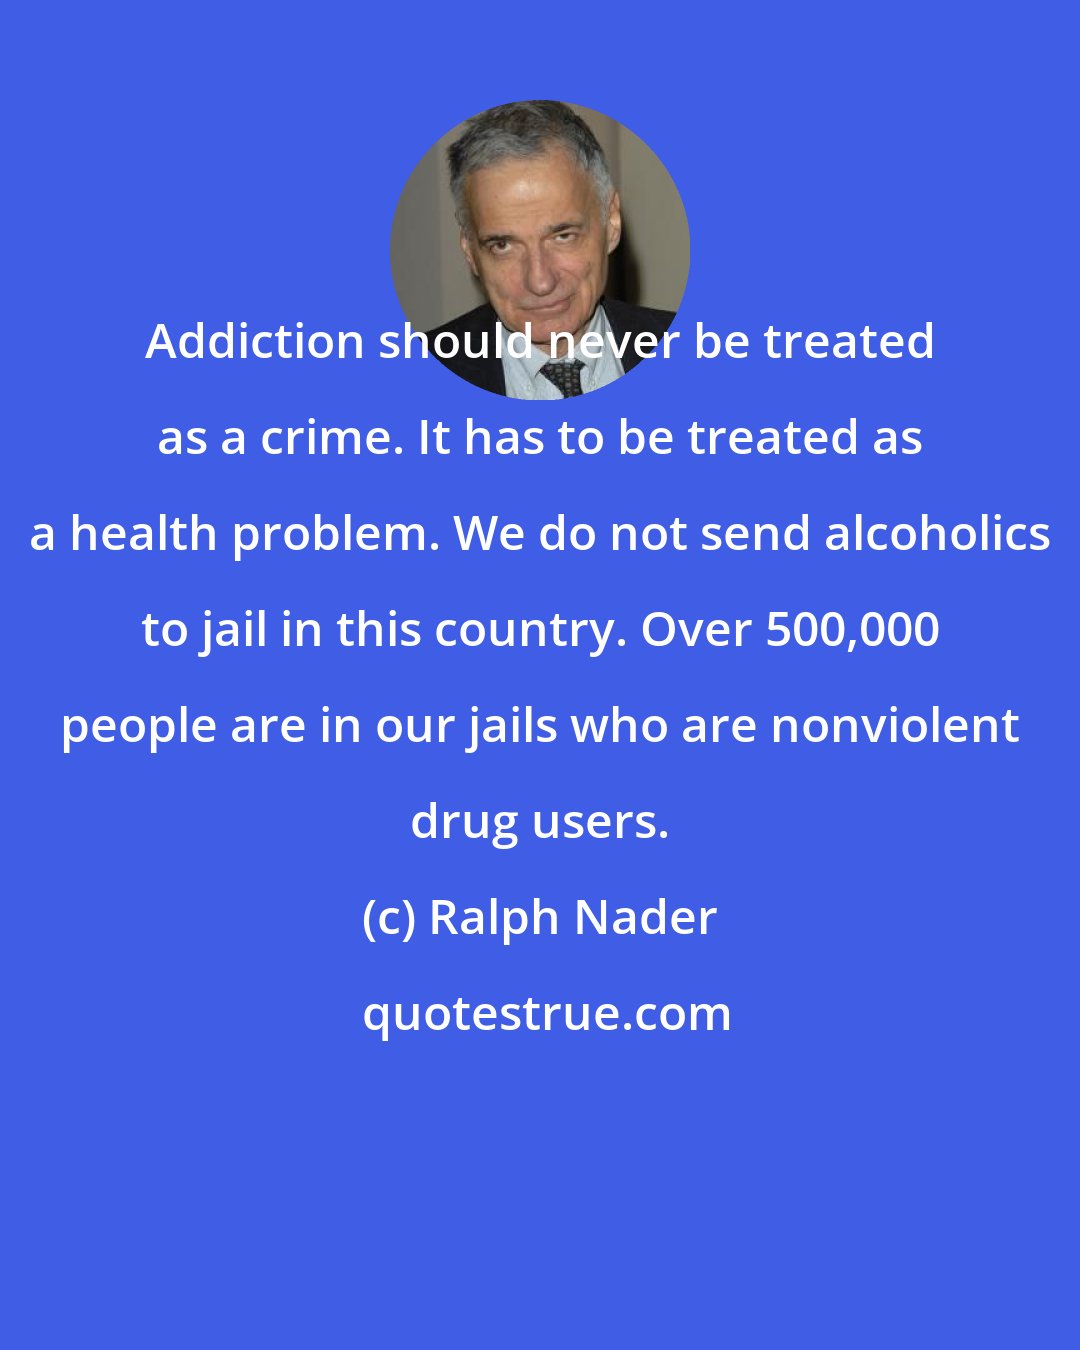 Ralph Nader: Addiction should never be treated as a crime. It has to be treated as a health problem. We do not send alcoholics to jail in this country. Over 500,000 people are in our jails who are nonviolent drug users.